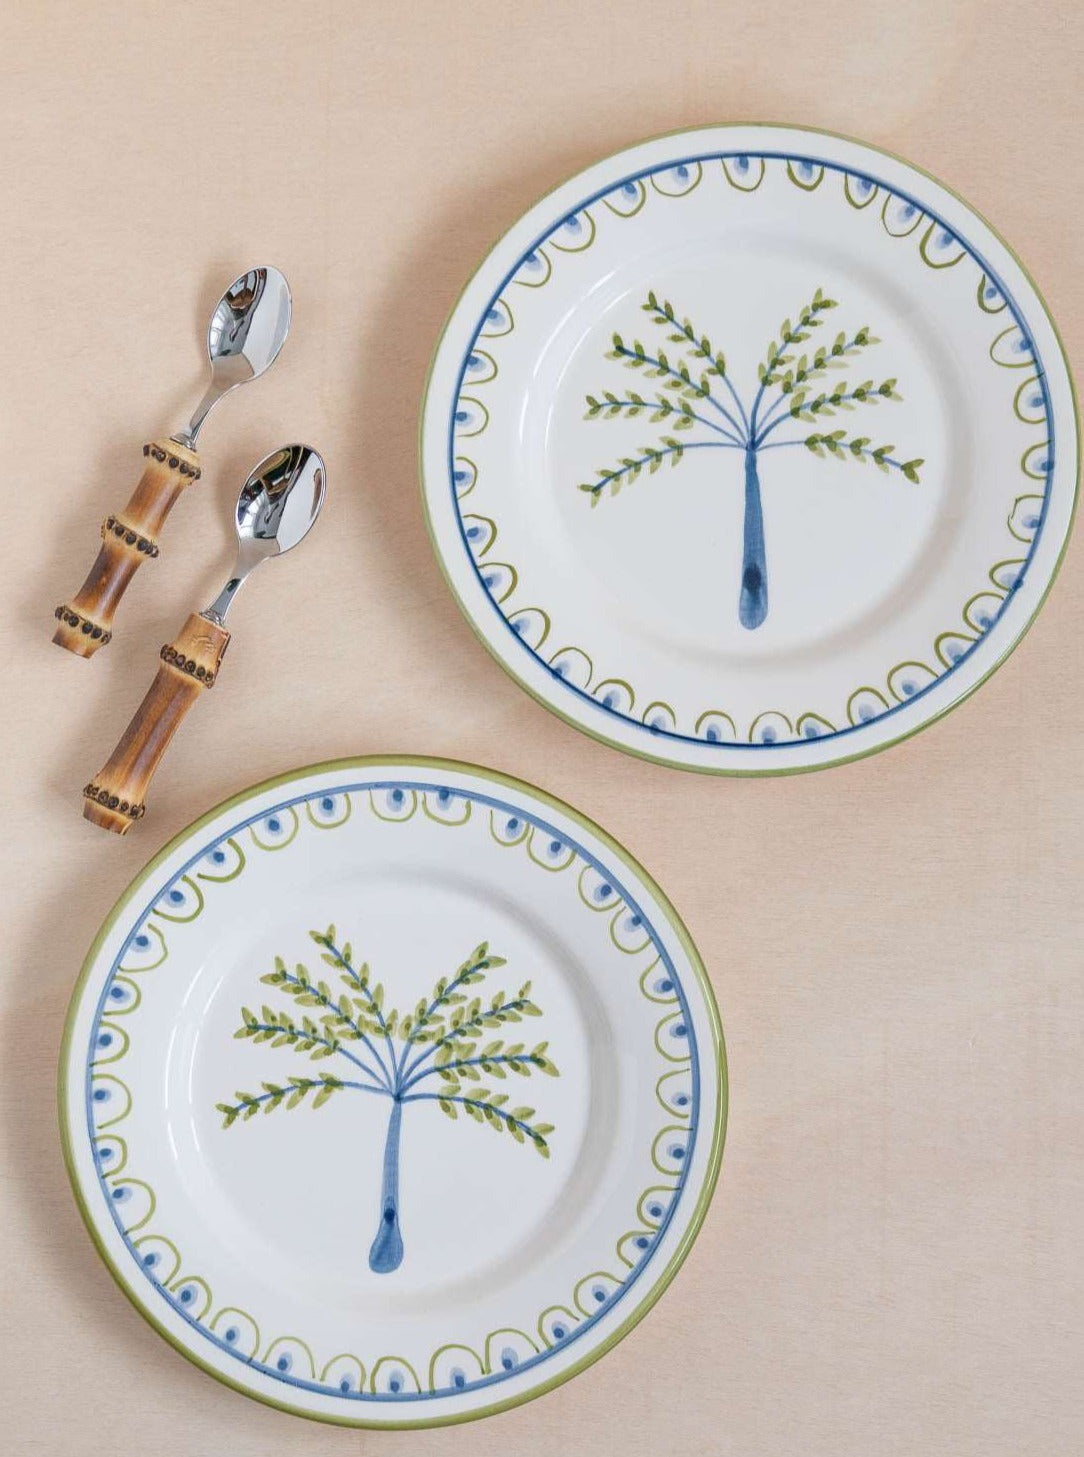 2 Coconut Tree Hand-Painted Ceramic Dessert Plate - White, Green, and Blue - Matching with Bamboo Cutlery